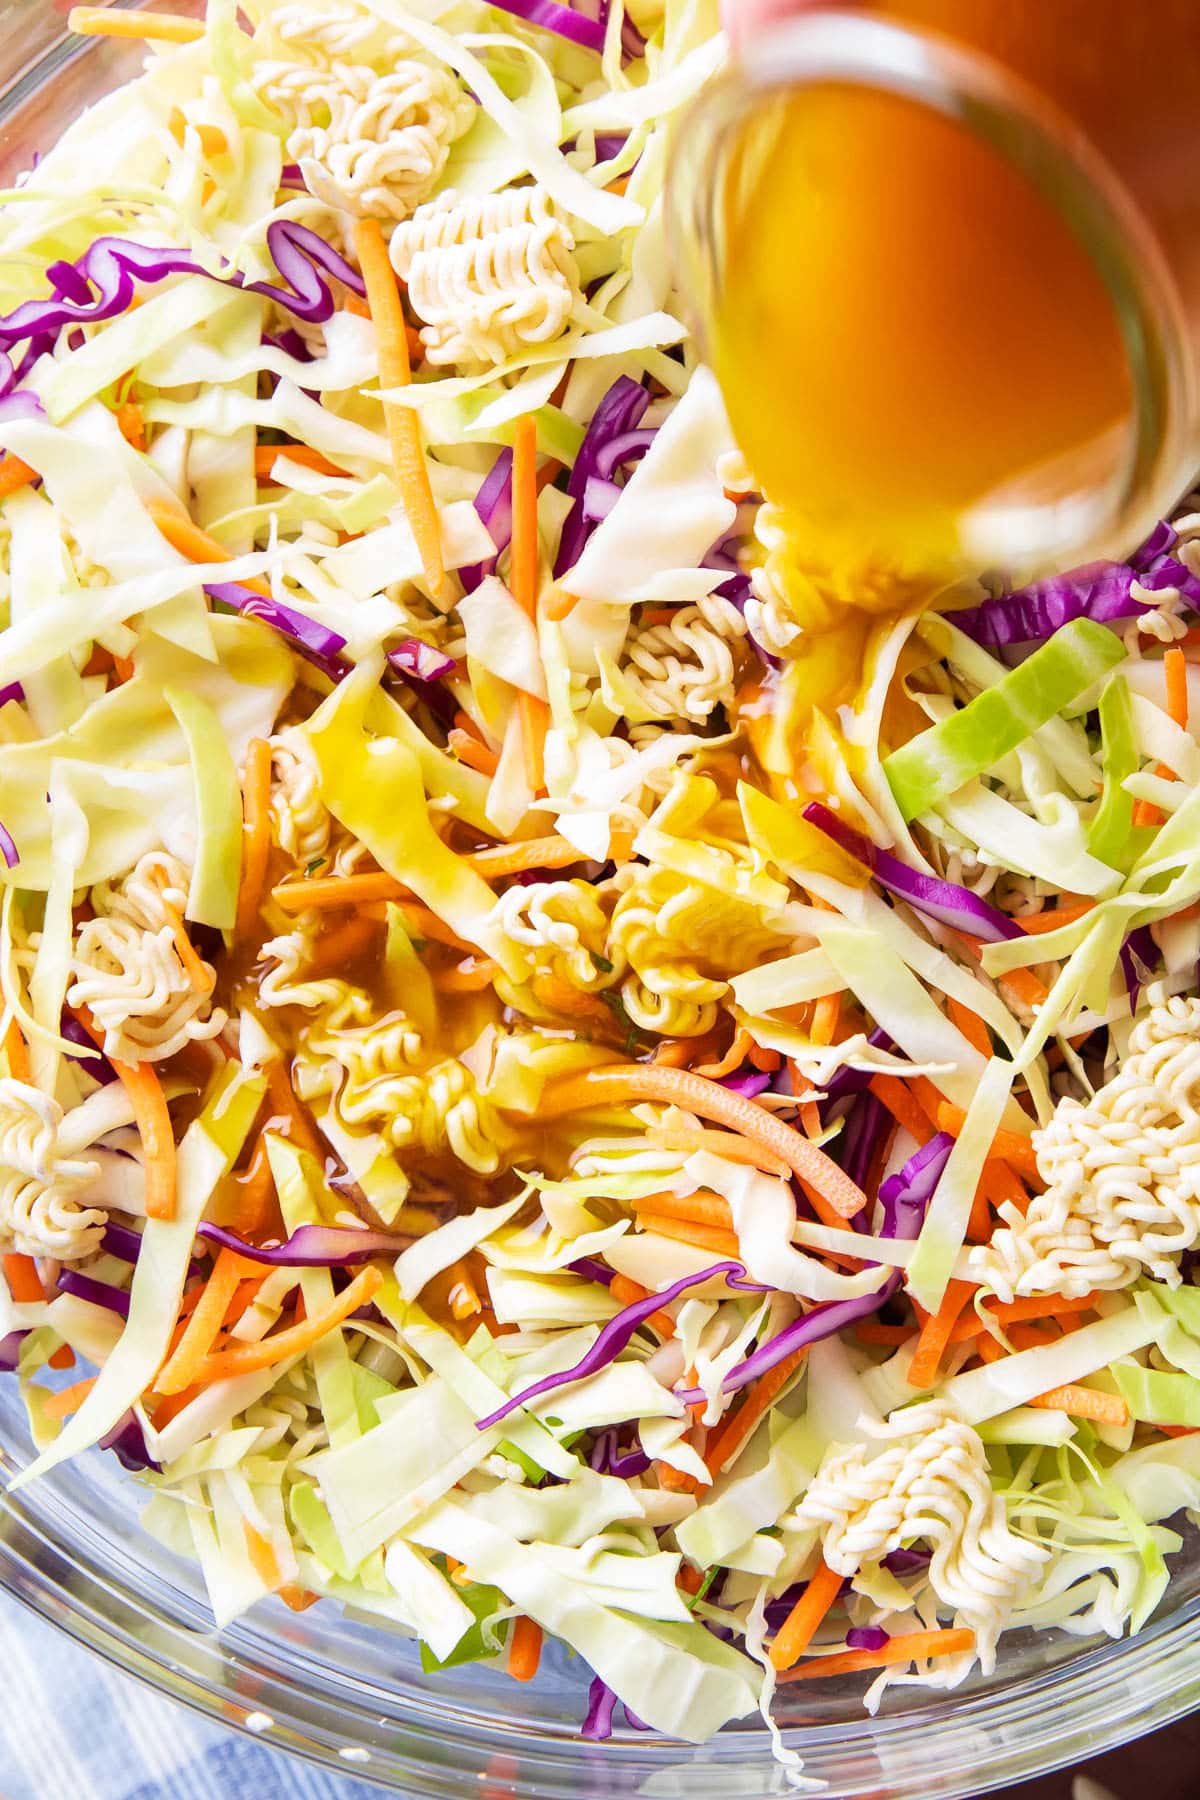 Pouring a jar of homemade dressing over ramen noodle salad packed with cabbage, green onions, almonds, and carrots.